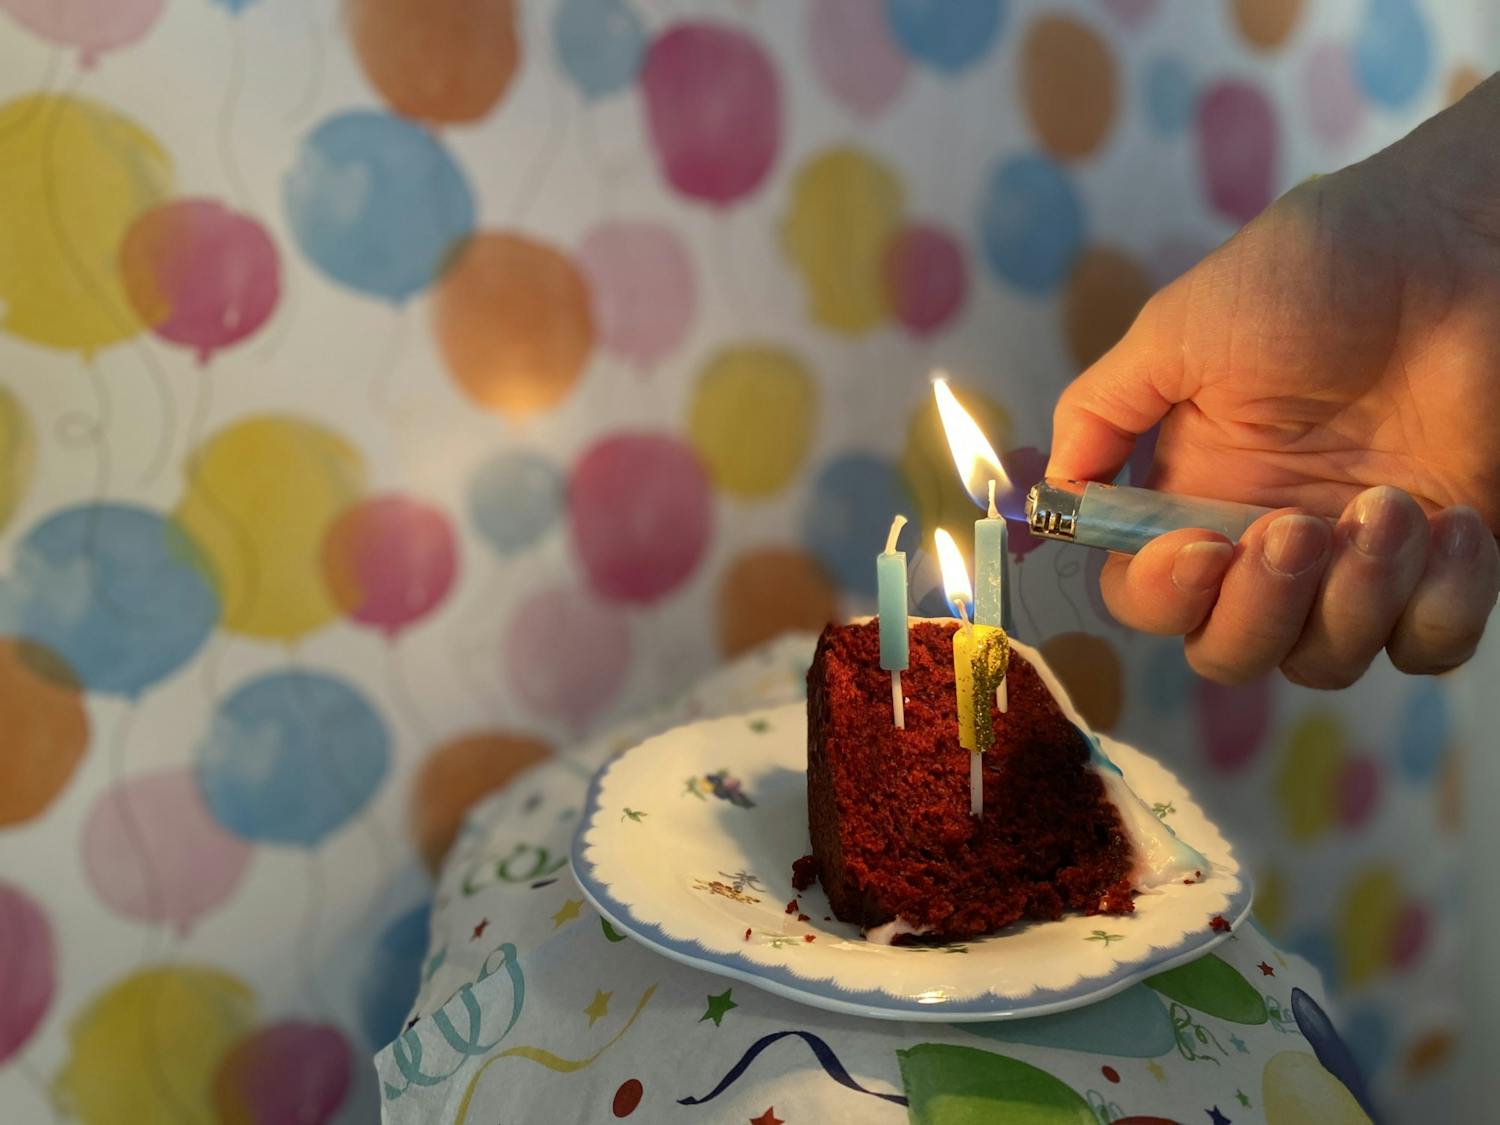 DTH Photo Illustration. Due to COVID-19 restrictions, people have found creative ways to celebrate their birthdays from a distance.